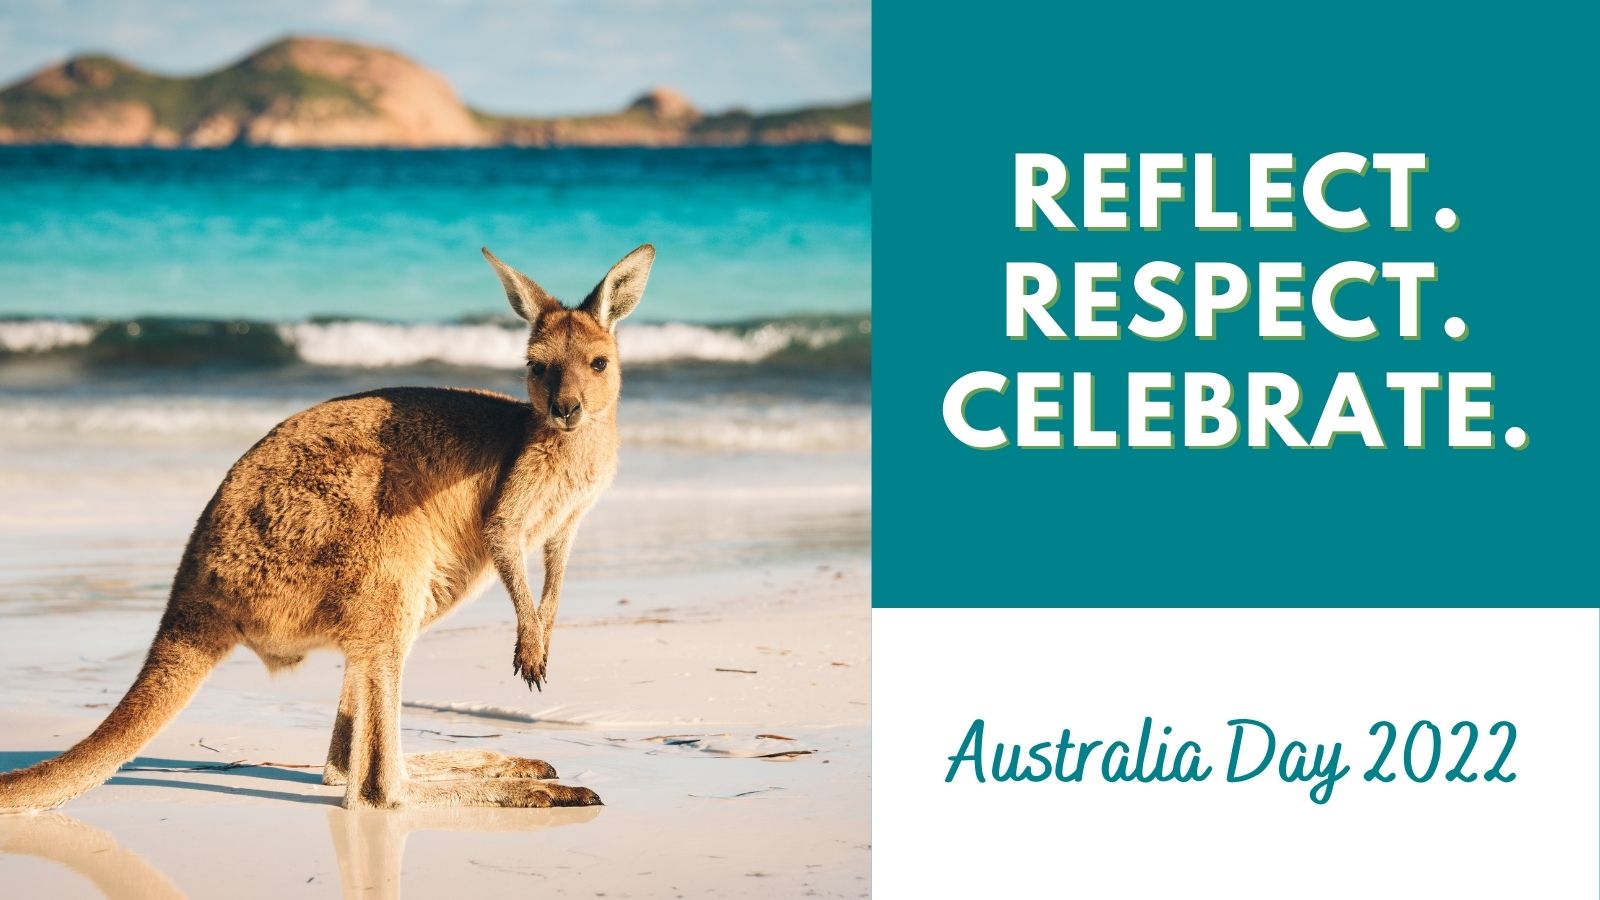 A kangaroo on a beach, with a banner \\\\\\\\\\\\\\\\\\\\\\\\\\\\\\\'Reflect. Respect. Celebrate"